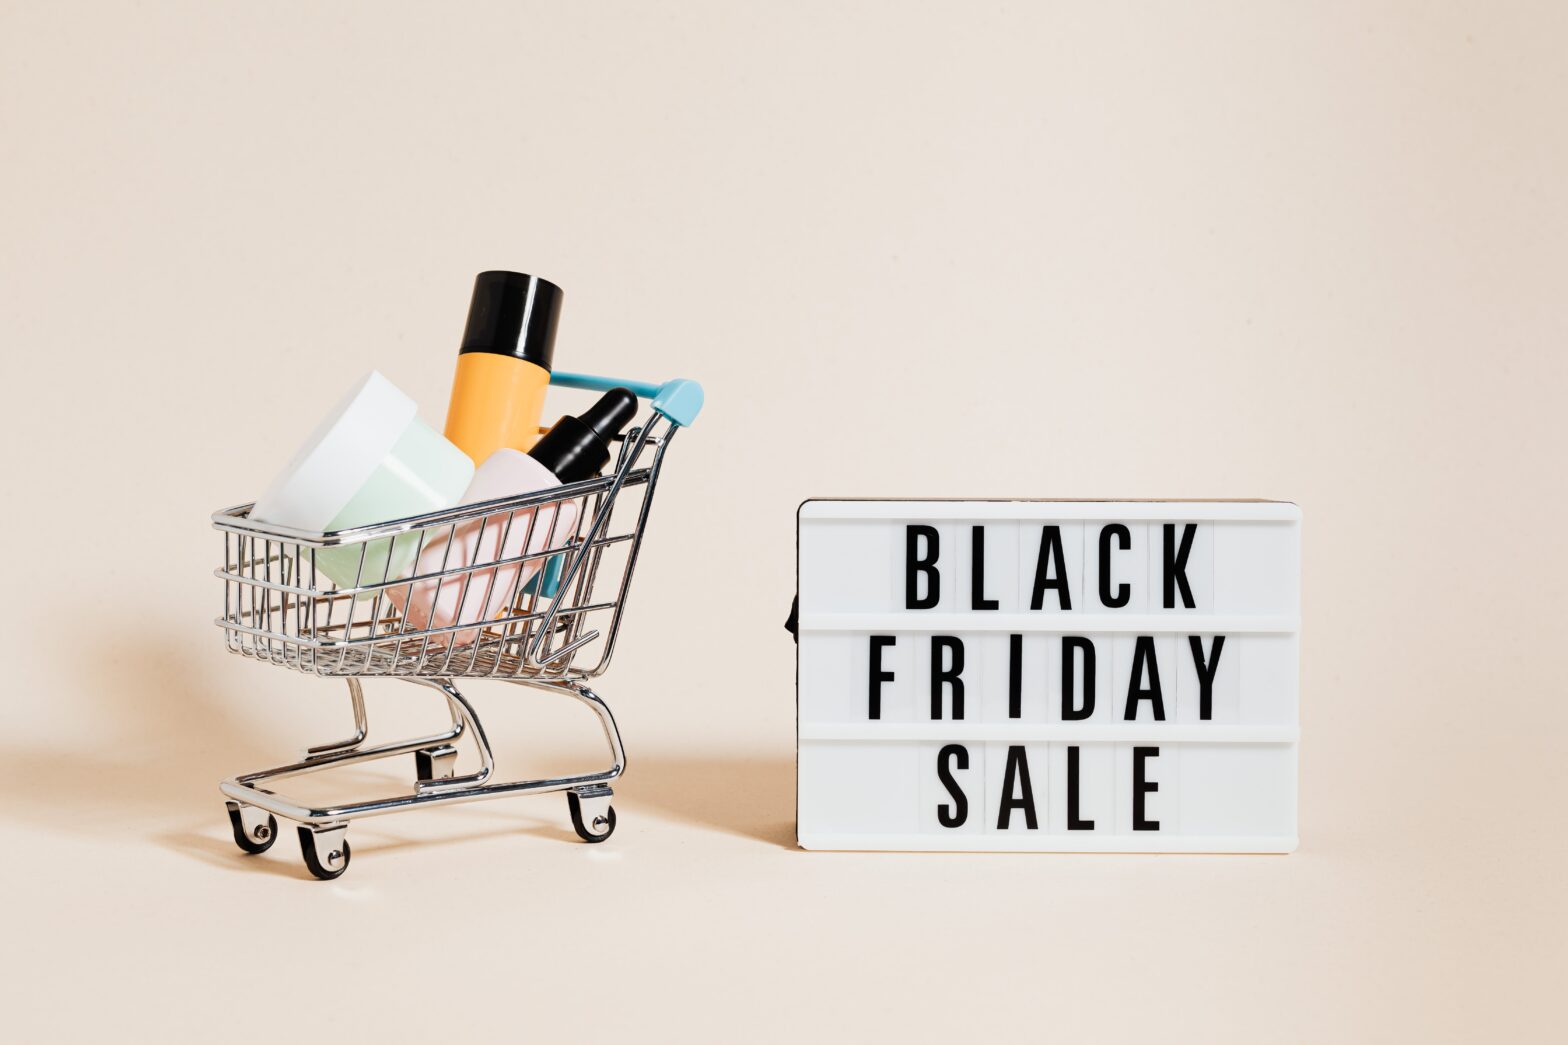 skin-care-products-in-a-shopping-cart-beside-a-black-friday-sale-signage-on-beige-background